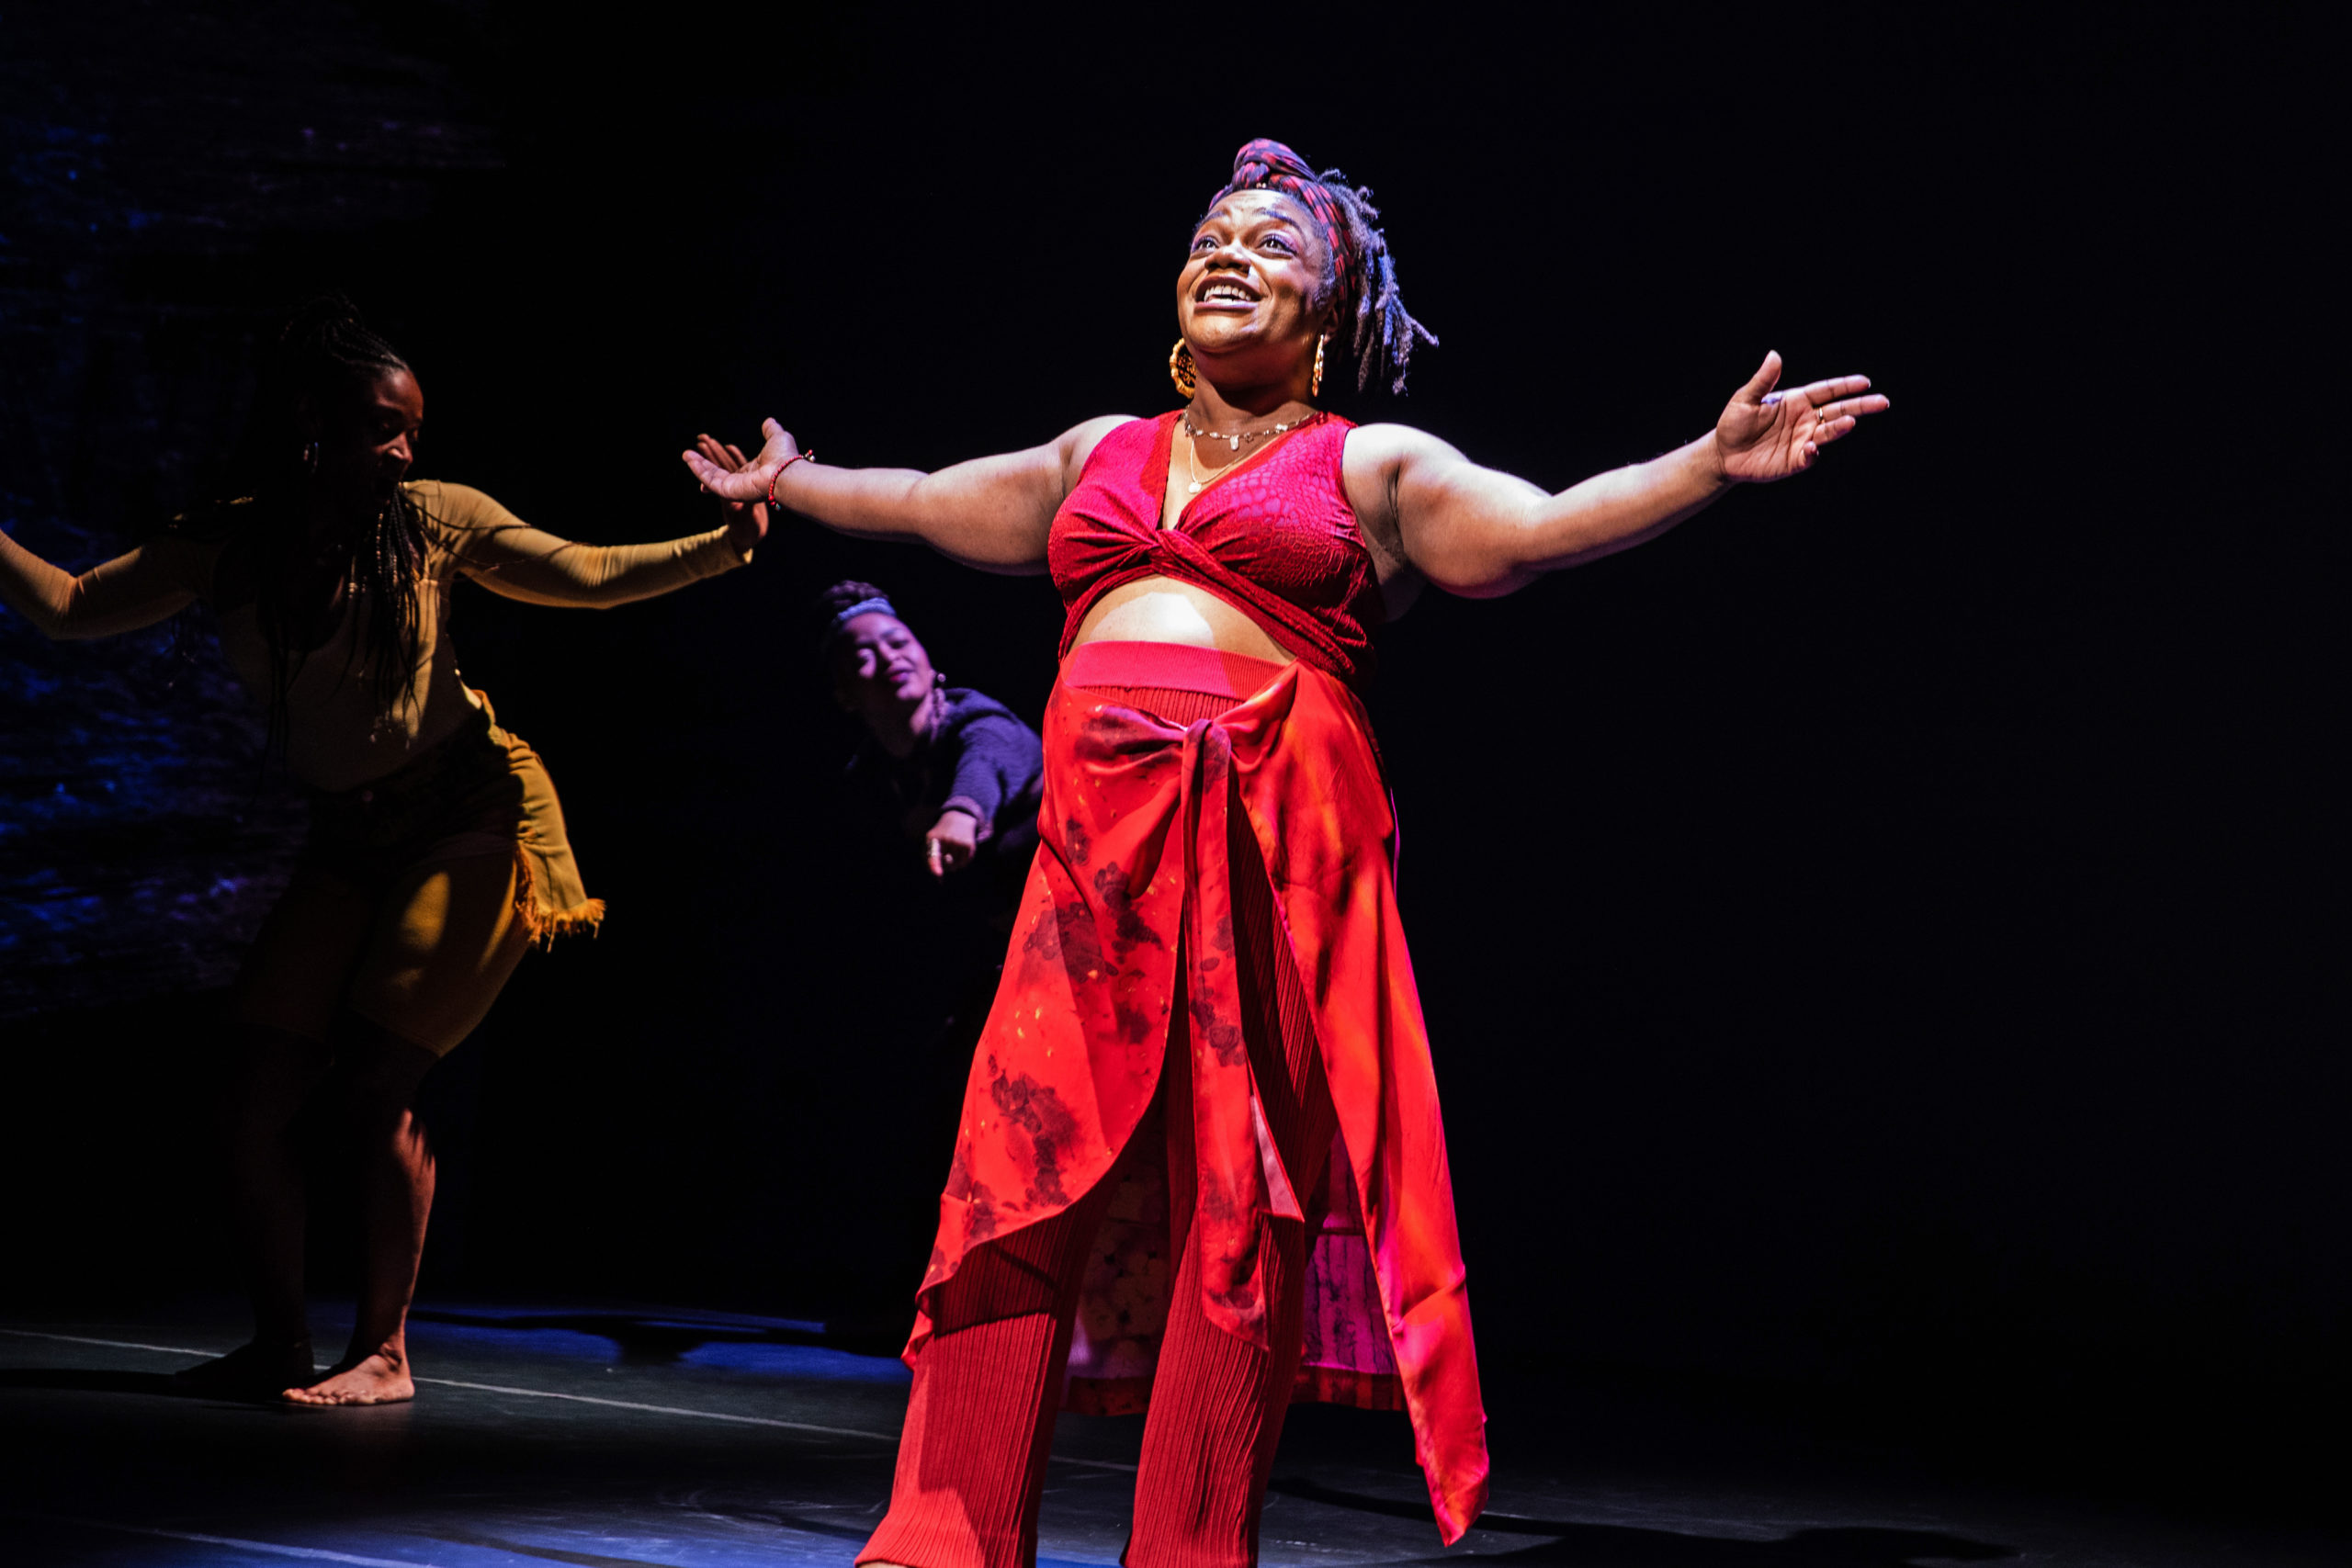 Kenita R. Miller, a Black pregnant Broadway star, extends her arms wide and beams onstage. She is wearing a red crop top and pants, and her pregnant belly is visible.